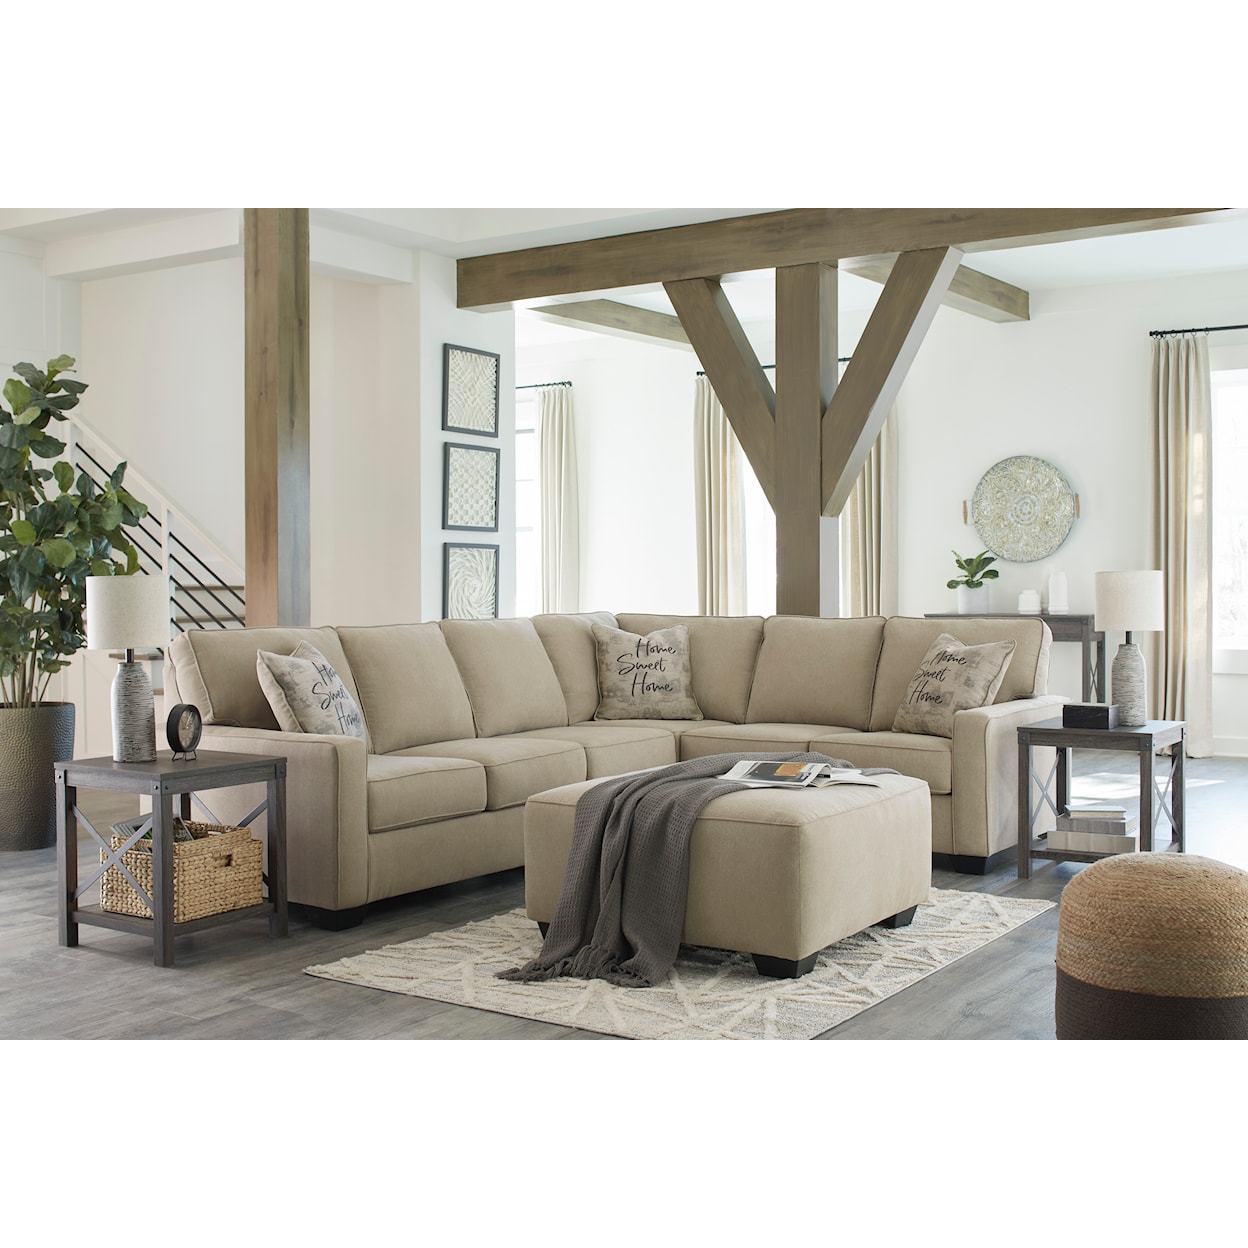 Signature Design by Ashley Lucina Living Room Set